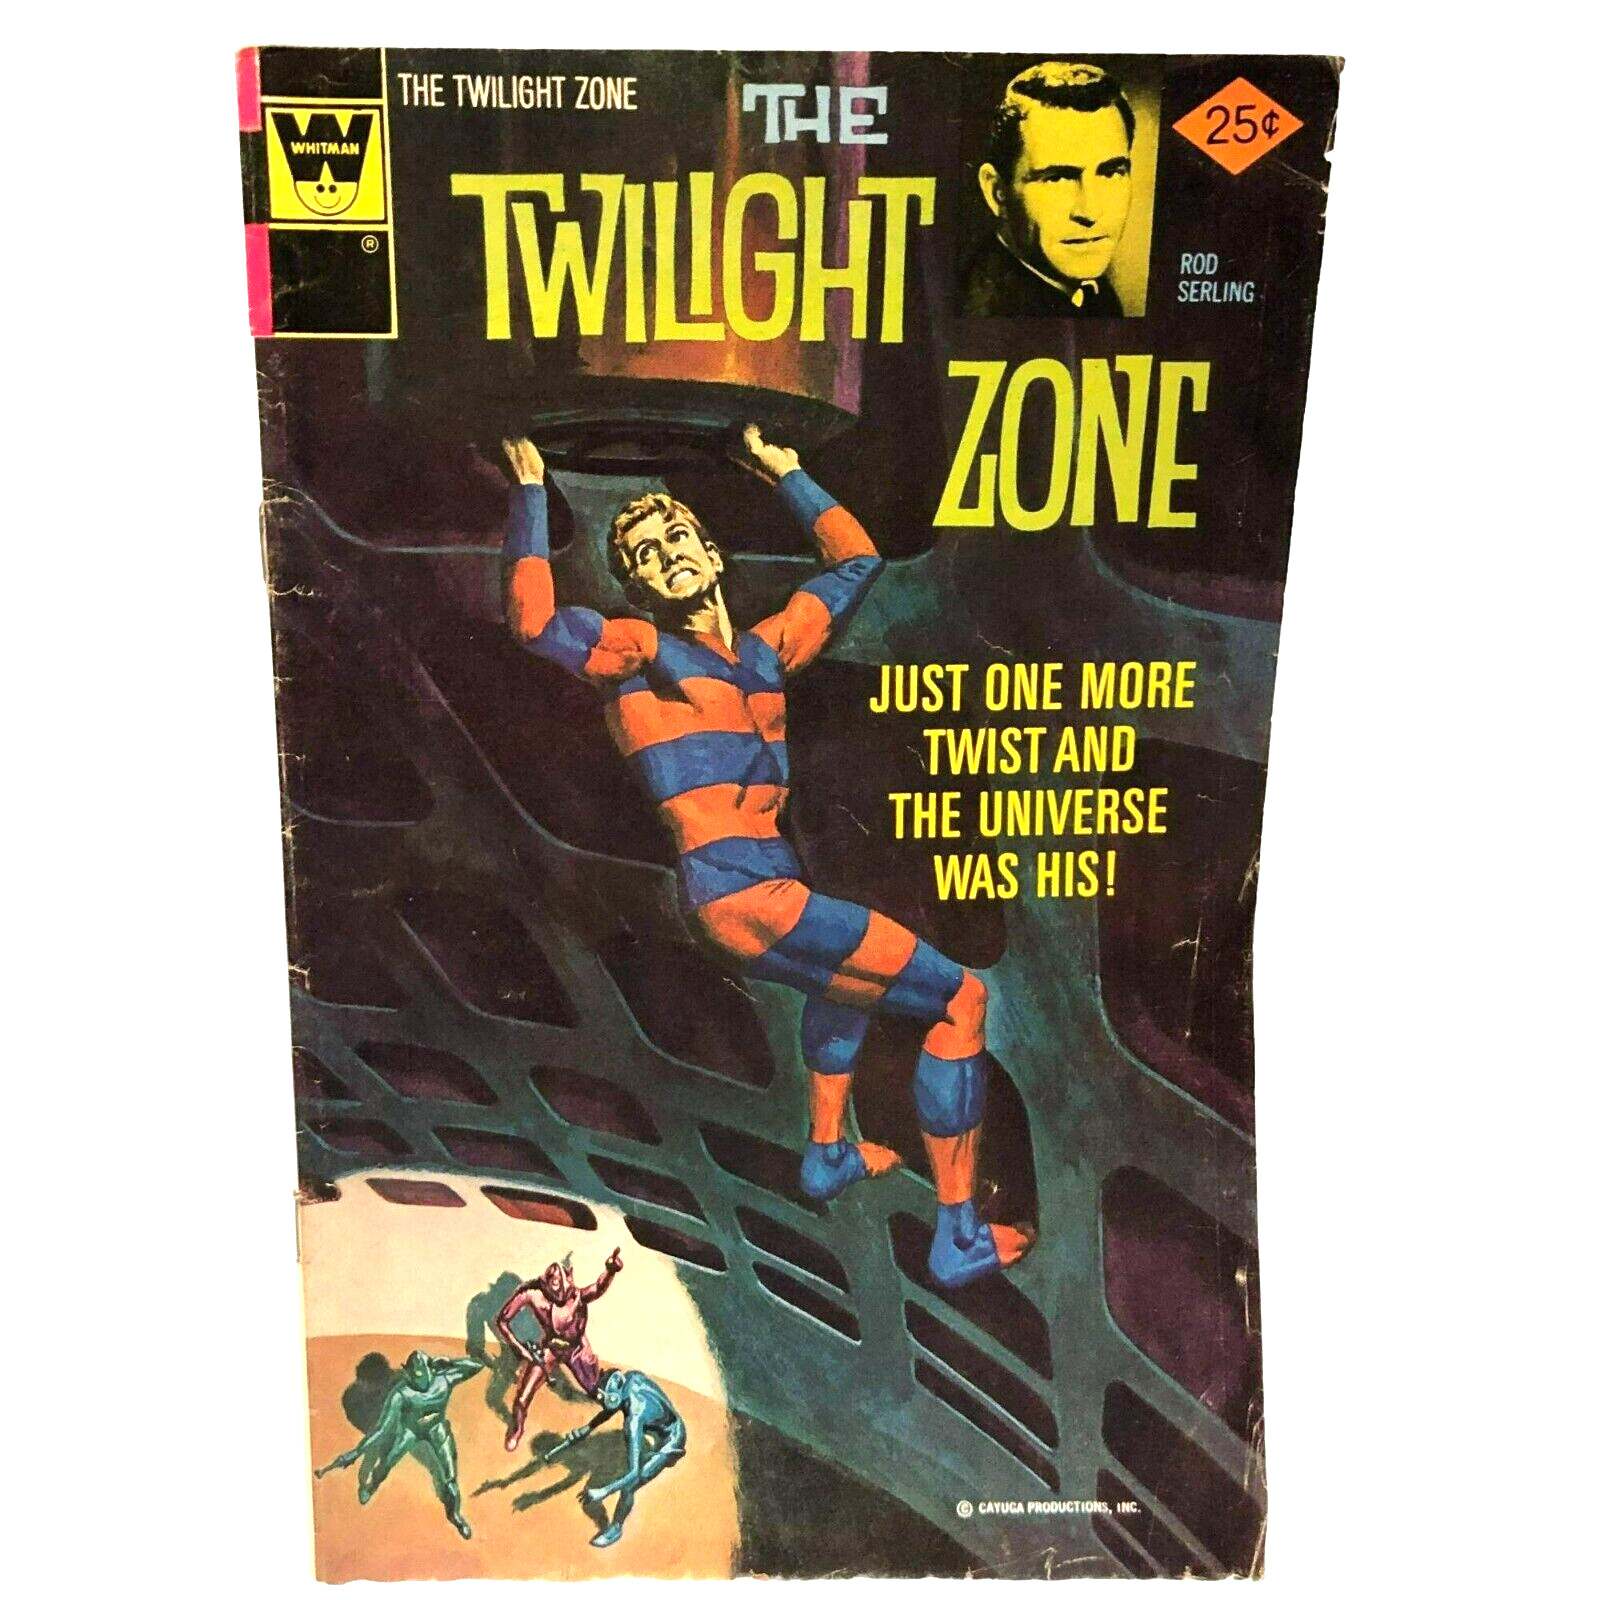 VTG THE TWILIGHT ZONE COMIC BOOK No 68 THE SECOND WILL WHITMAN JAN 1976 GREAT